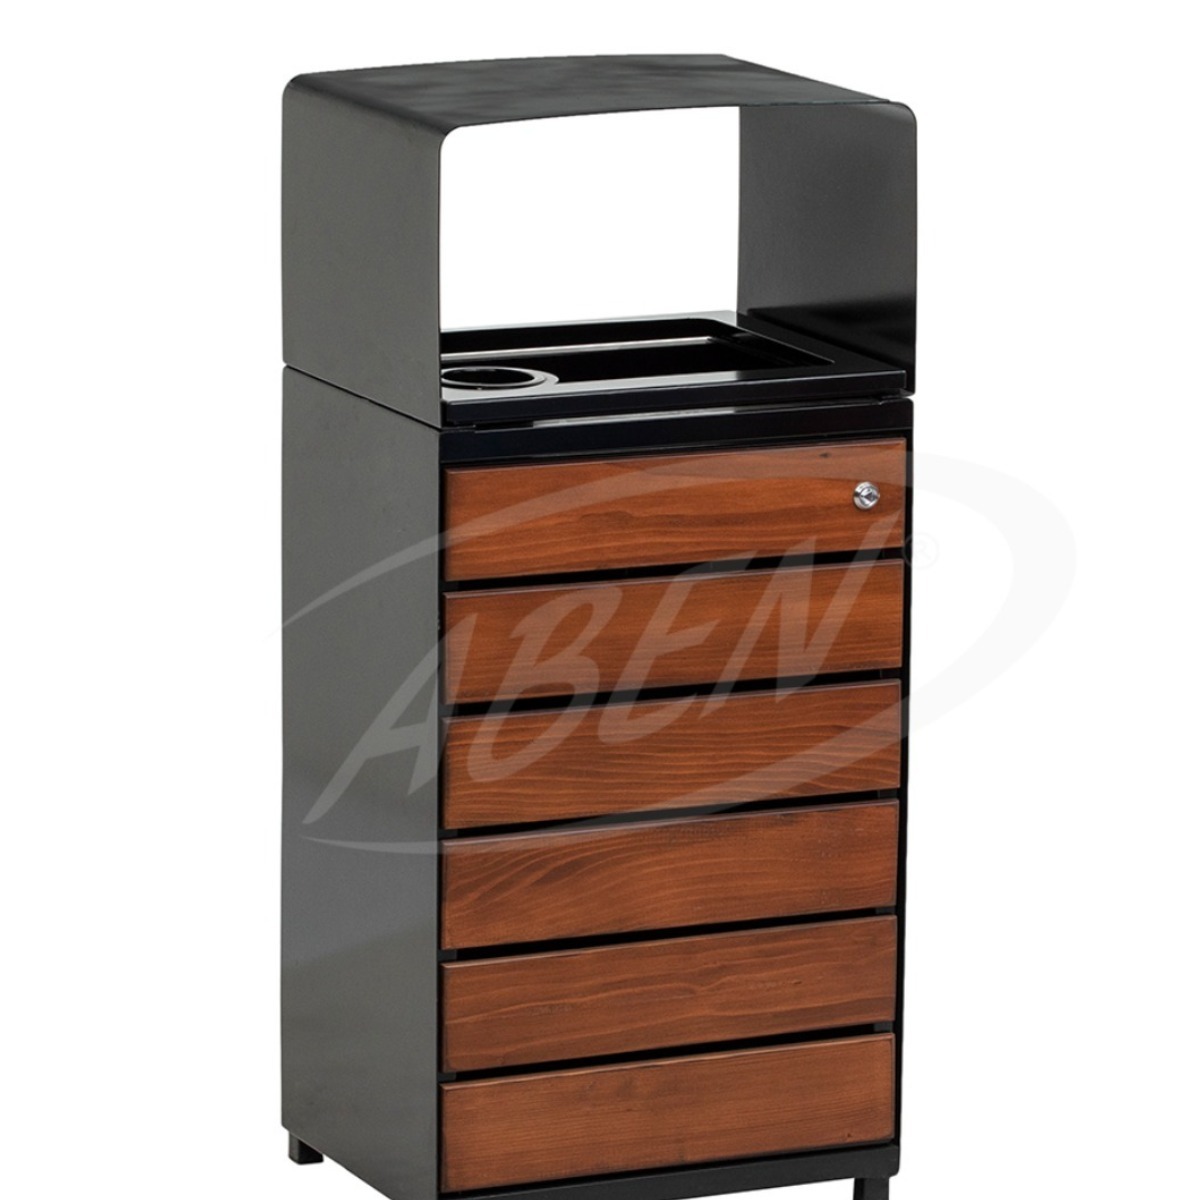 AB-519 Wood Open Space Trash Can